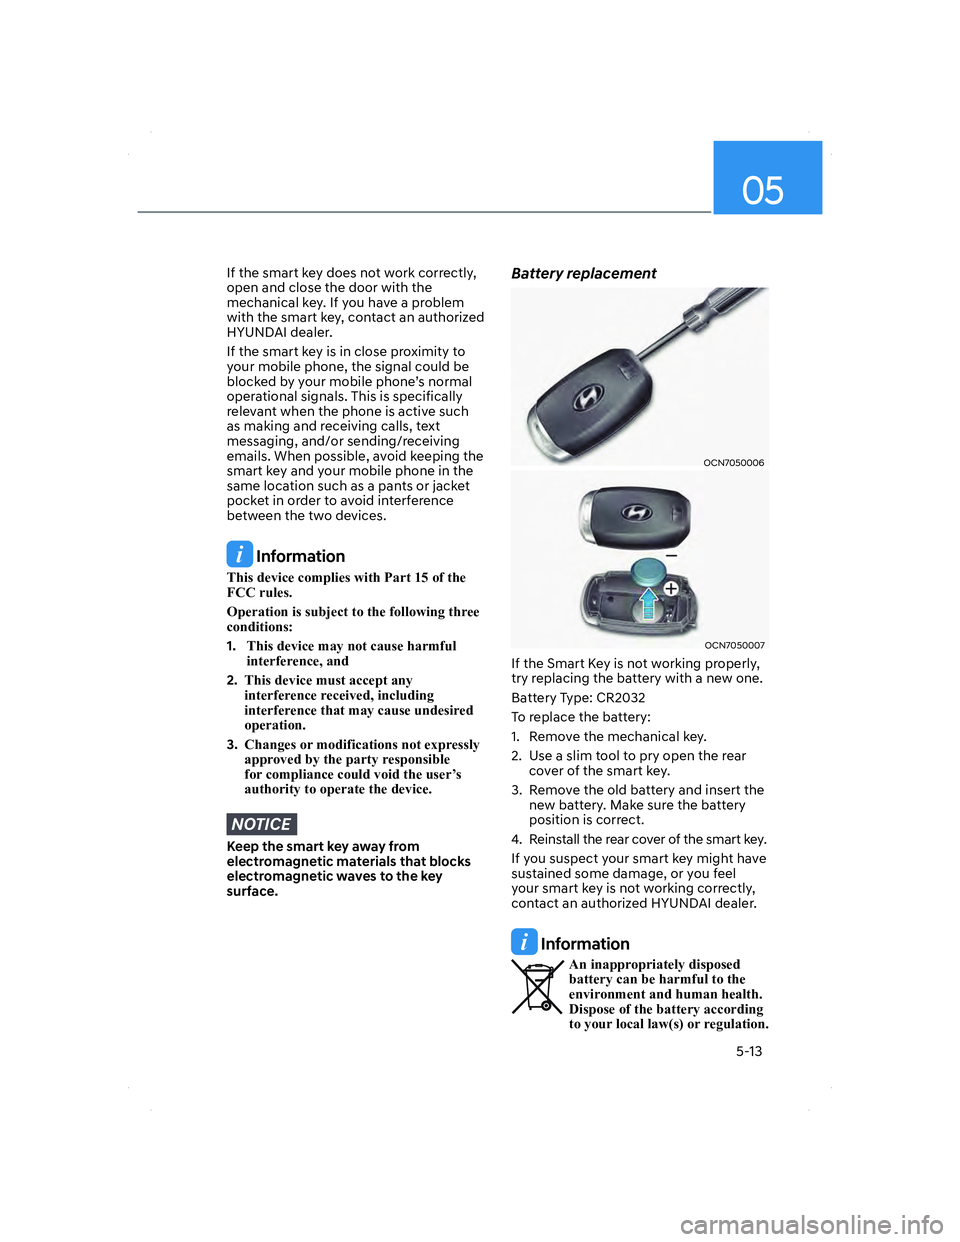 HYUNDAI ELANTRA 2022 Owners Guide 05
5-13
If the smart key does not work correctly, 
open and close the door with the 
mechanical key. If you have a problem 
with the smart key, contact an authorized 
HYUNDAI dealer.
If the smart key 